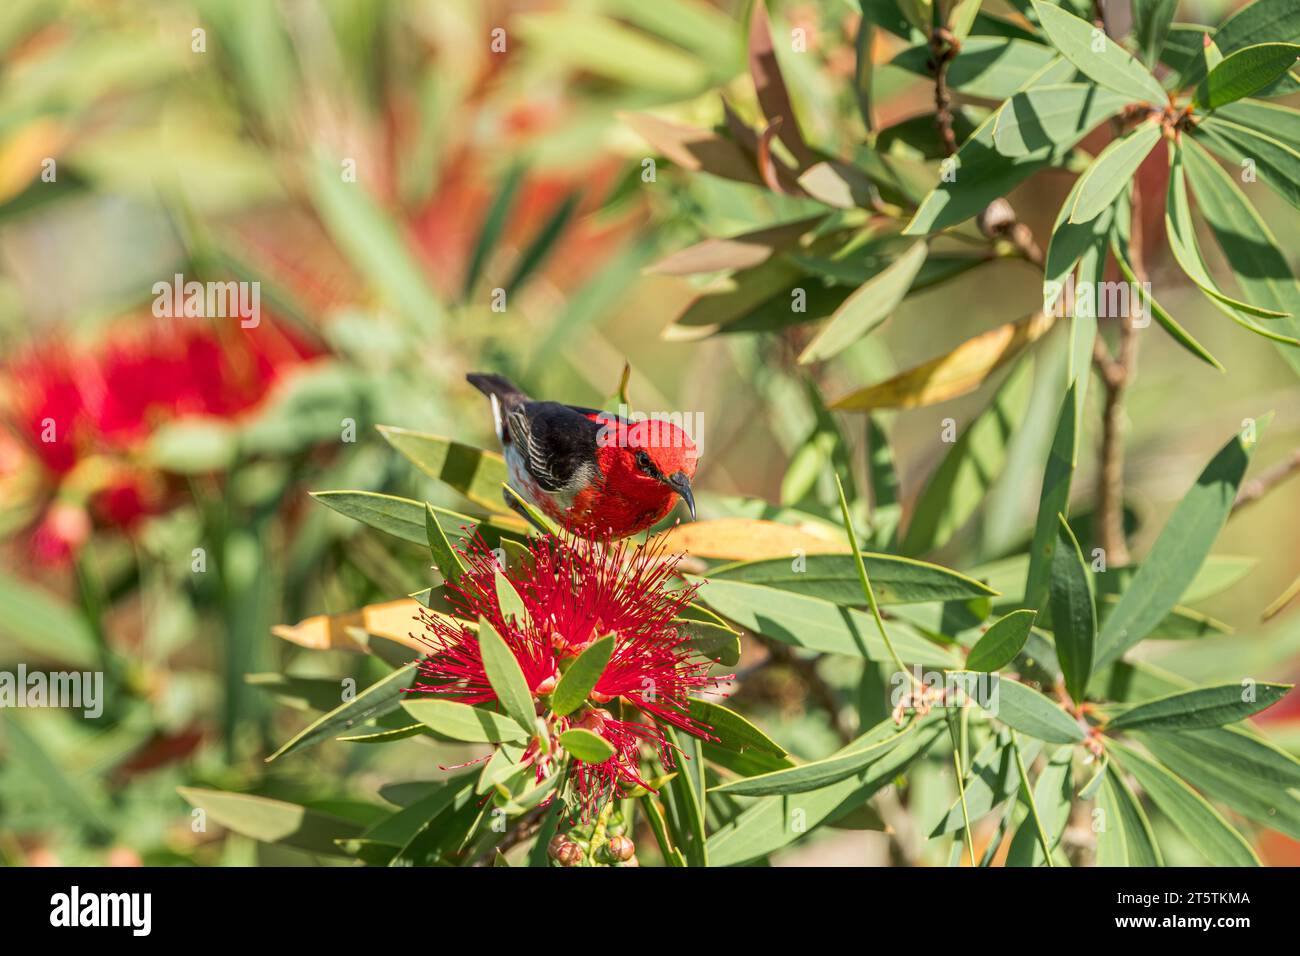 Perched atop a beautiful crimson bloom a Scarlet Honeyeater contemplates feeding on the flower of a Red powder puff shrub. Stock Photo